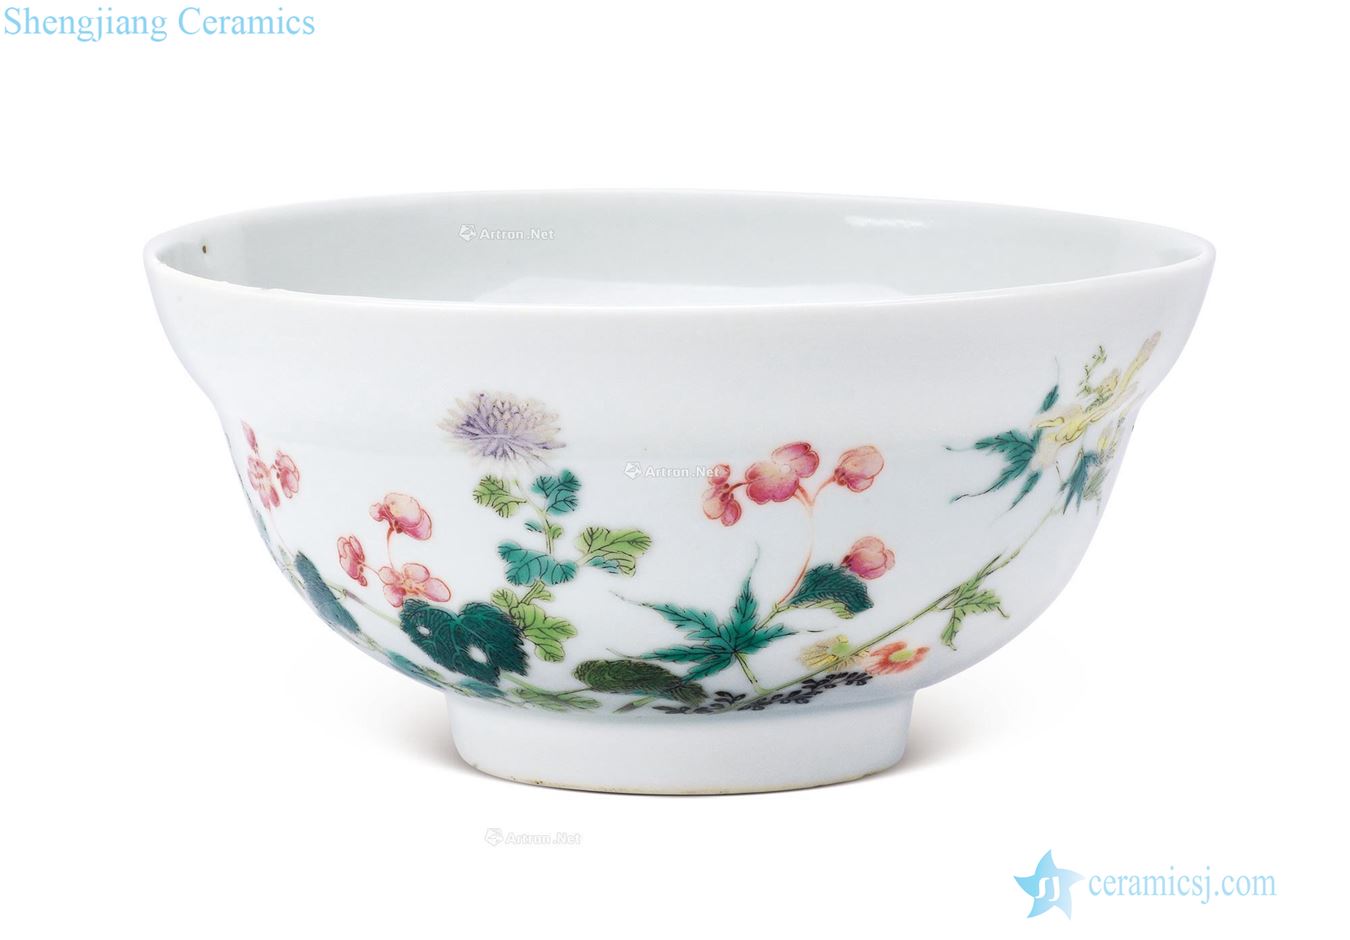 Clear pastel flowers fold along the bowl